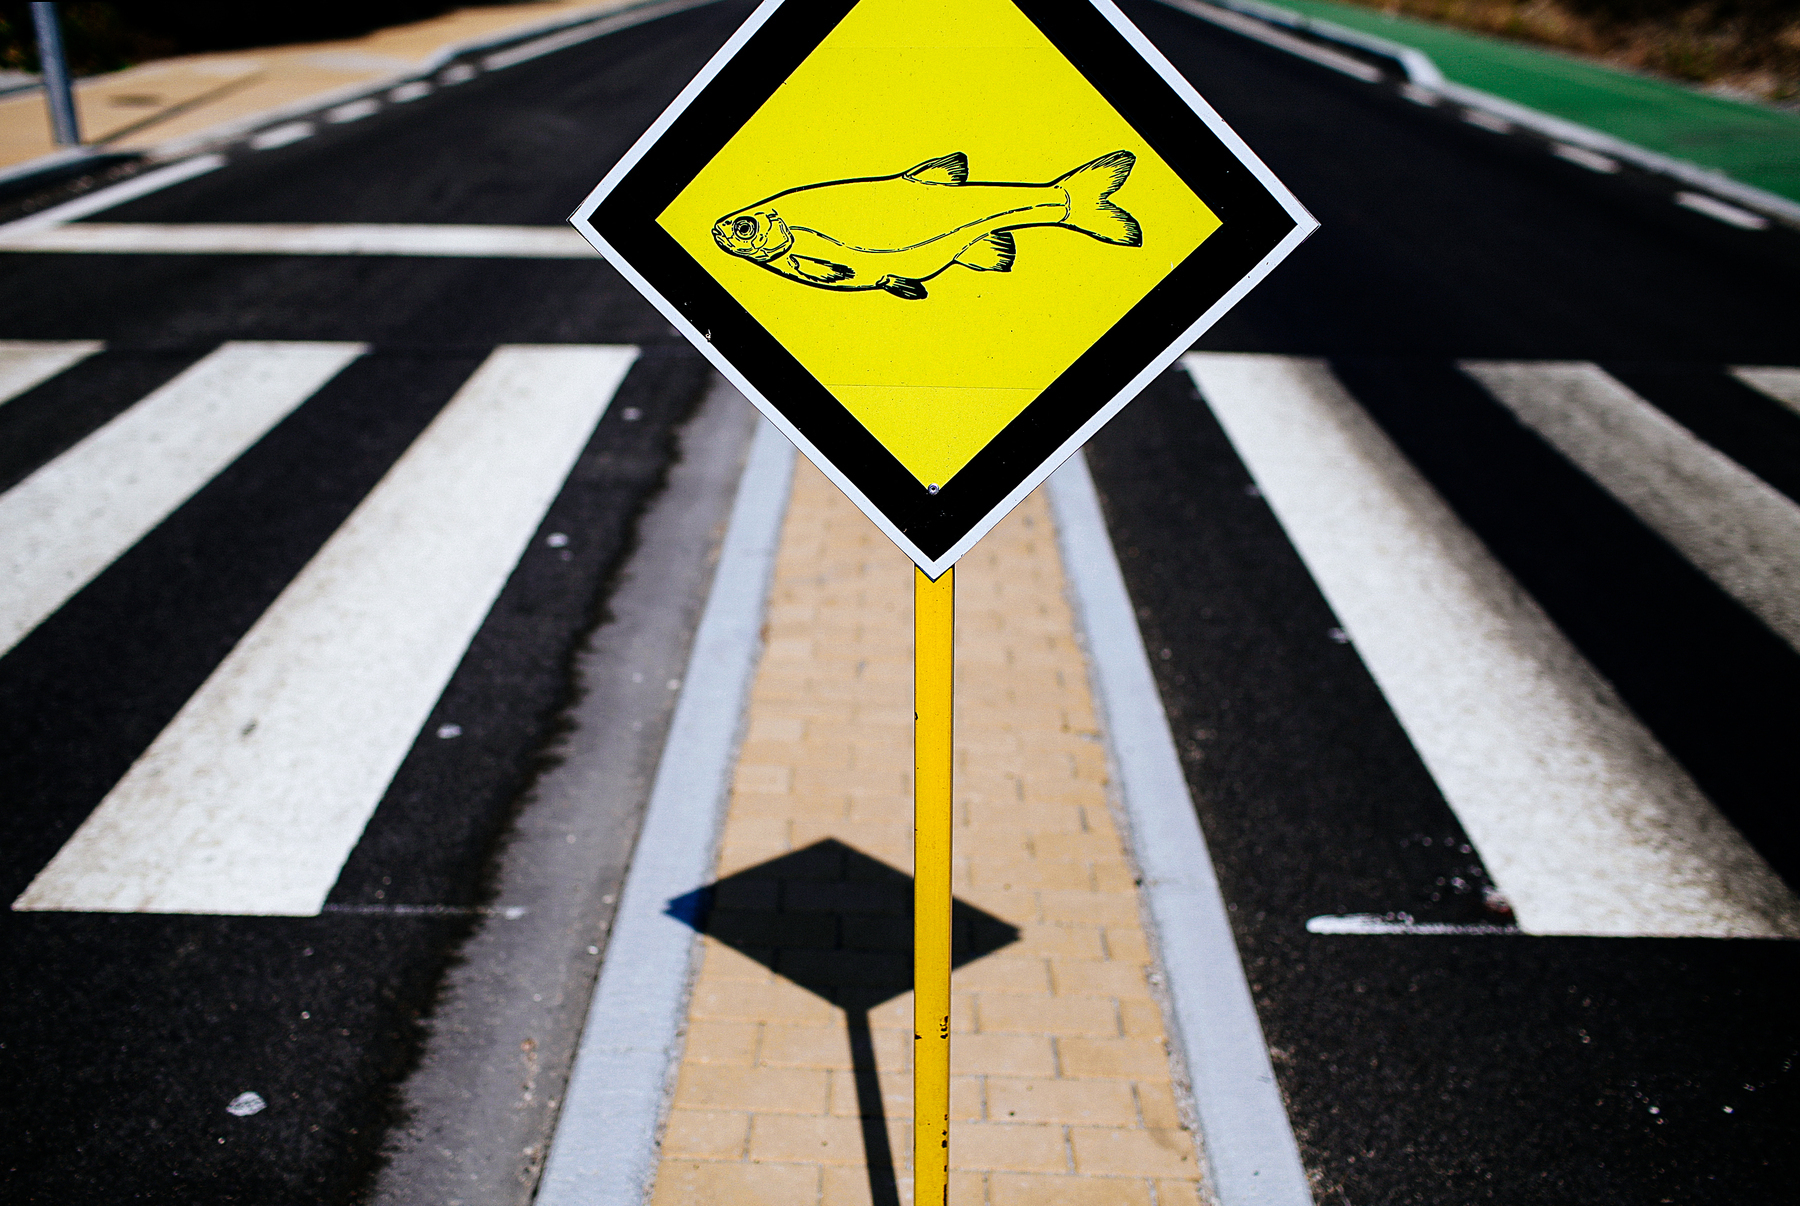 A road sign warns drivers that fish might be ahead. Yes, I know it sounds strange, but it really is a photo of a sign, on a road, with a fish on it.